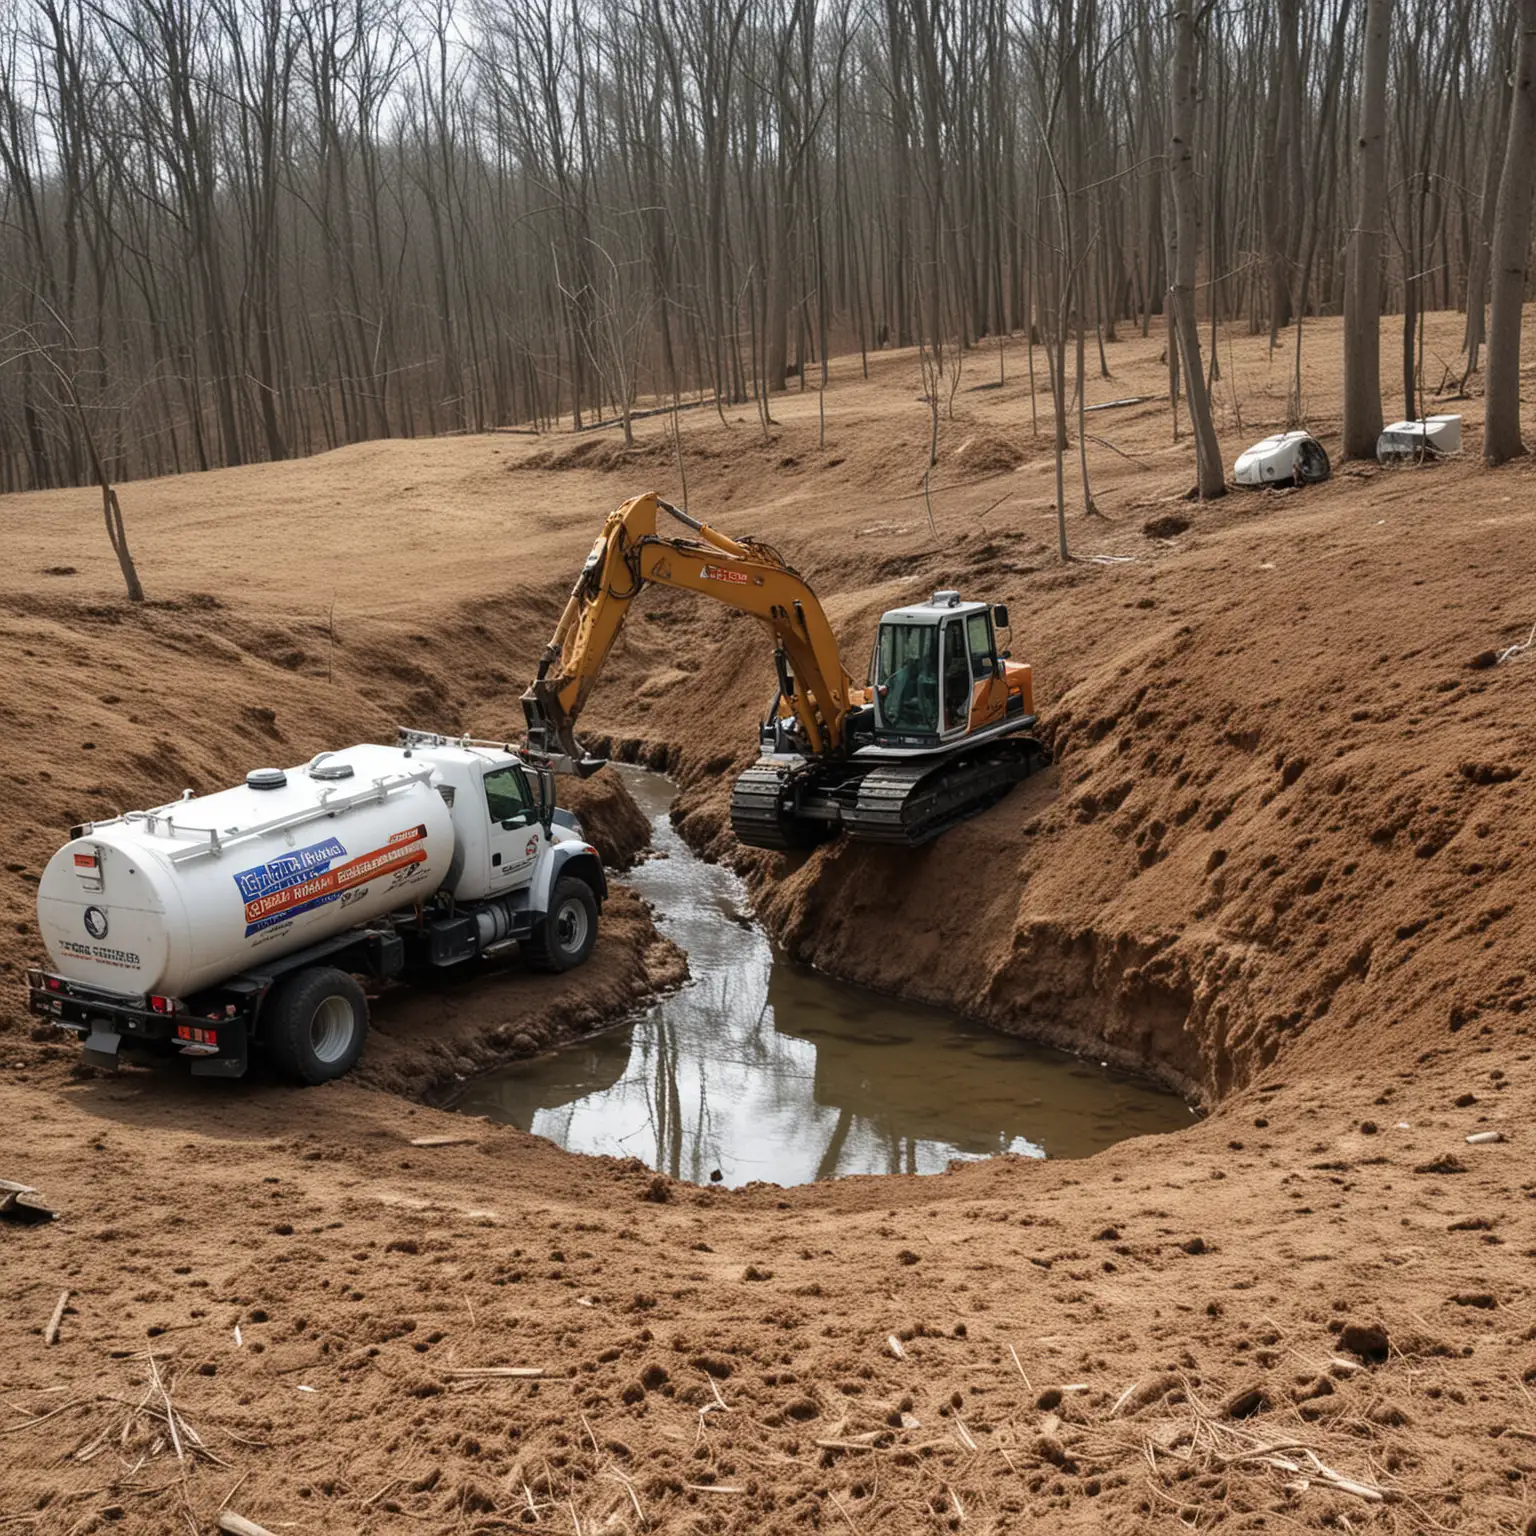 Septic Tank Services images for Installation Services, Maintenance Services, Repair Services Emergency Services


